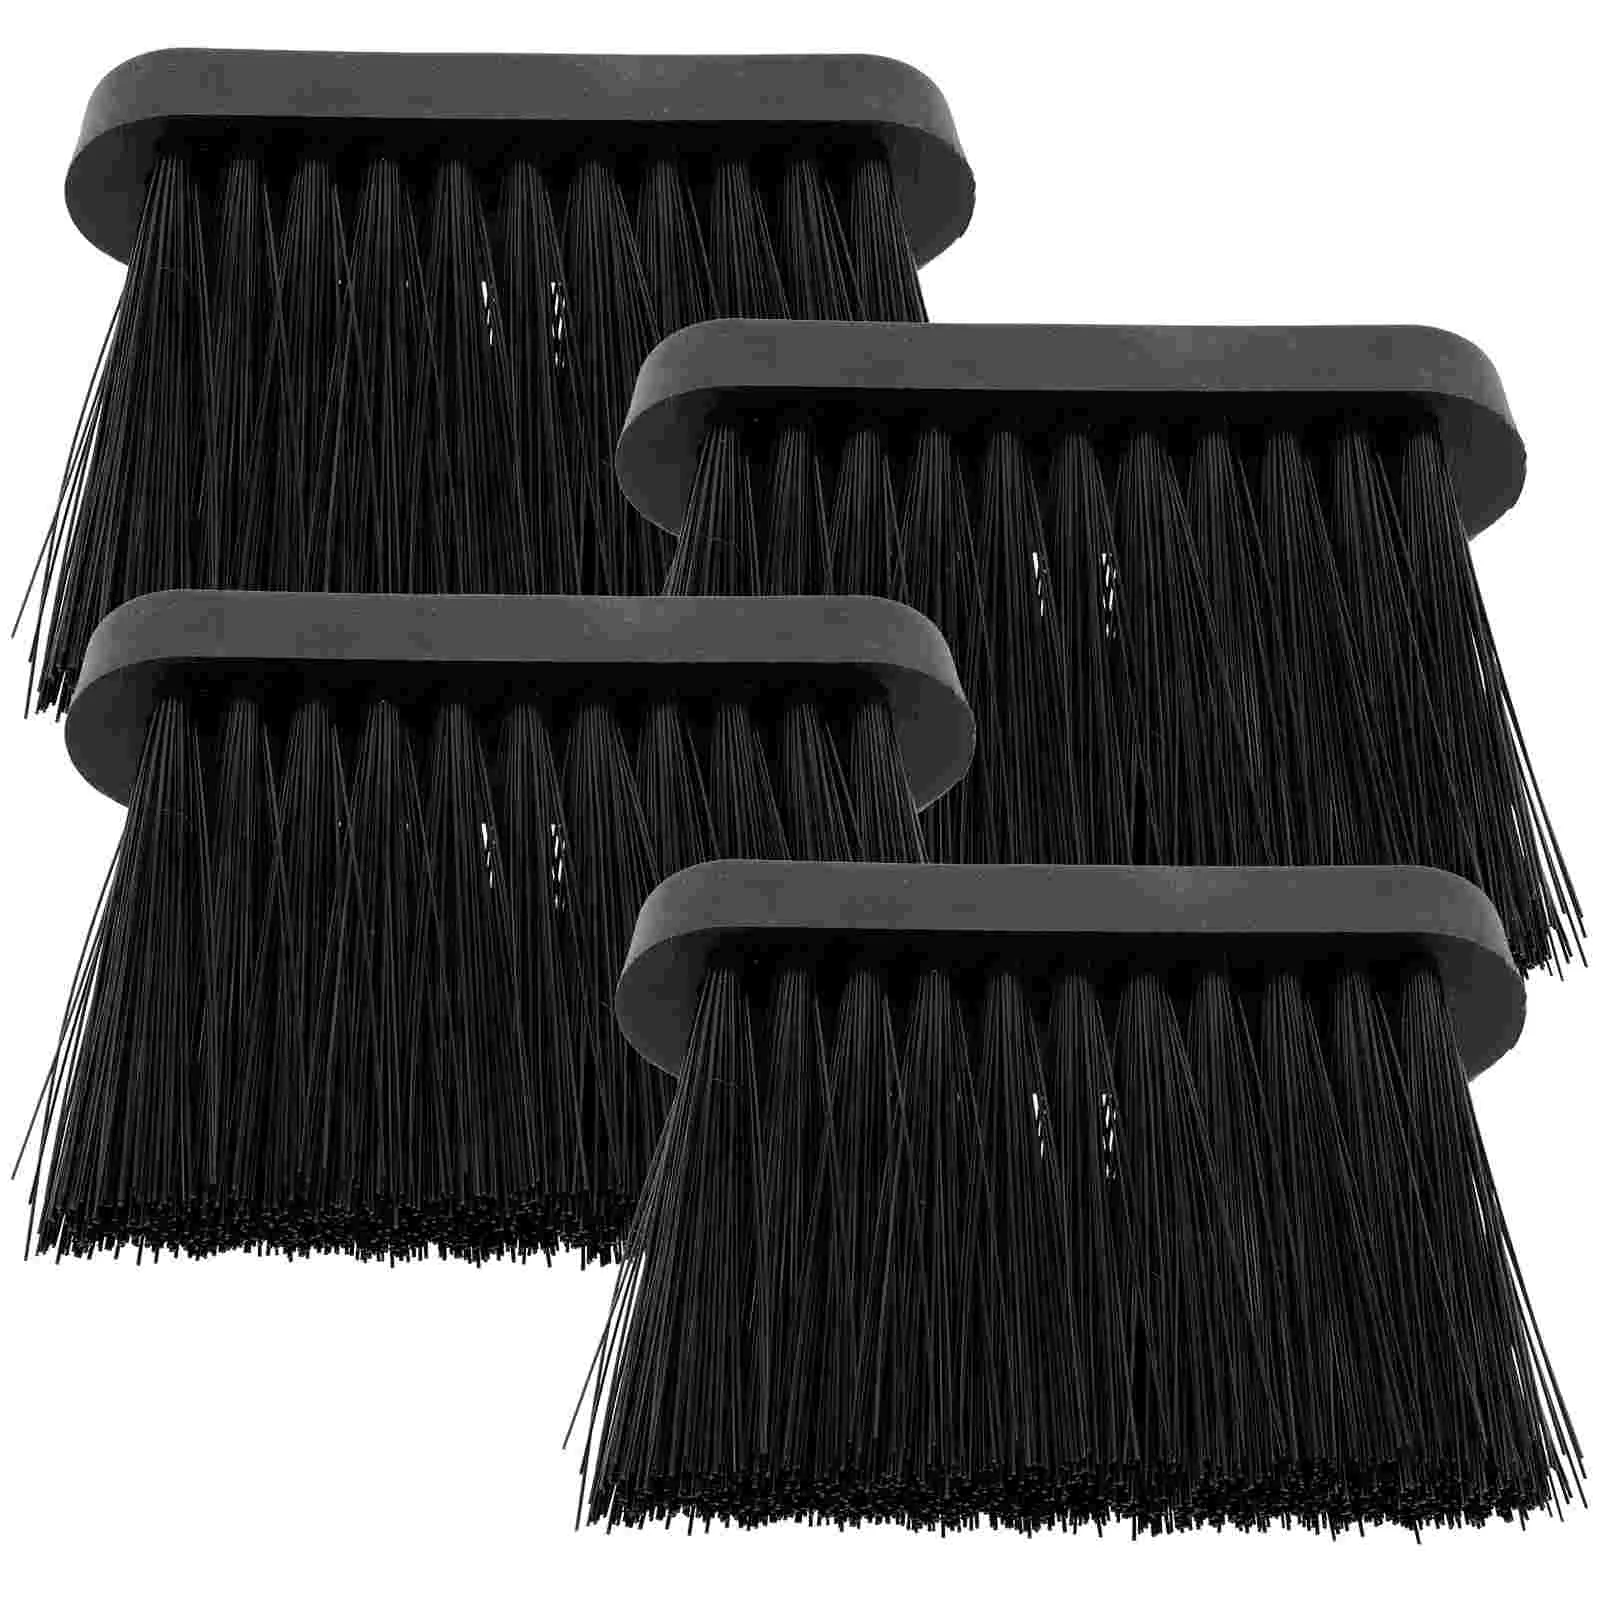 

4 Pcs Fireplace Brush Broom Accessories Coffee Duster Supplies Plastic Component Tool Cleaning